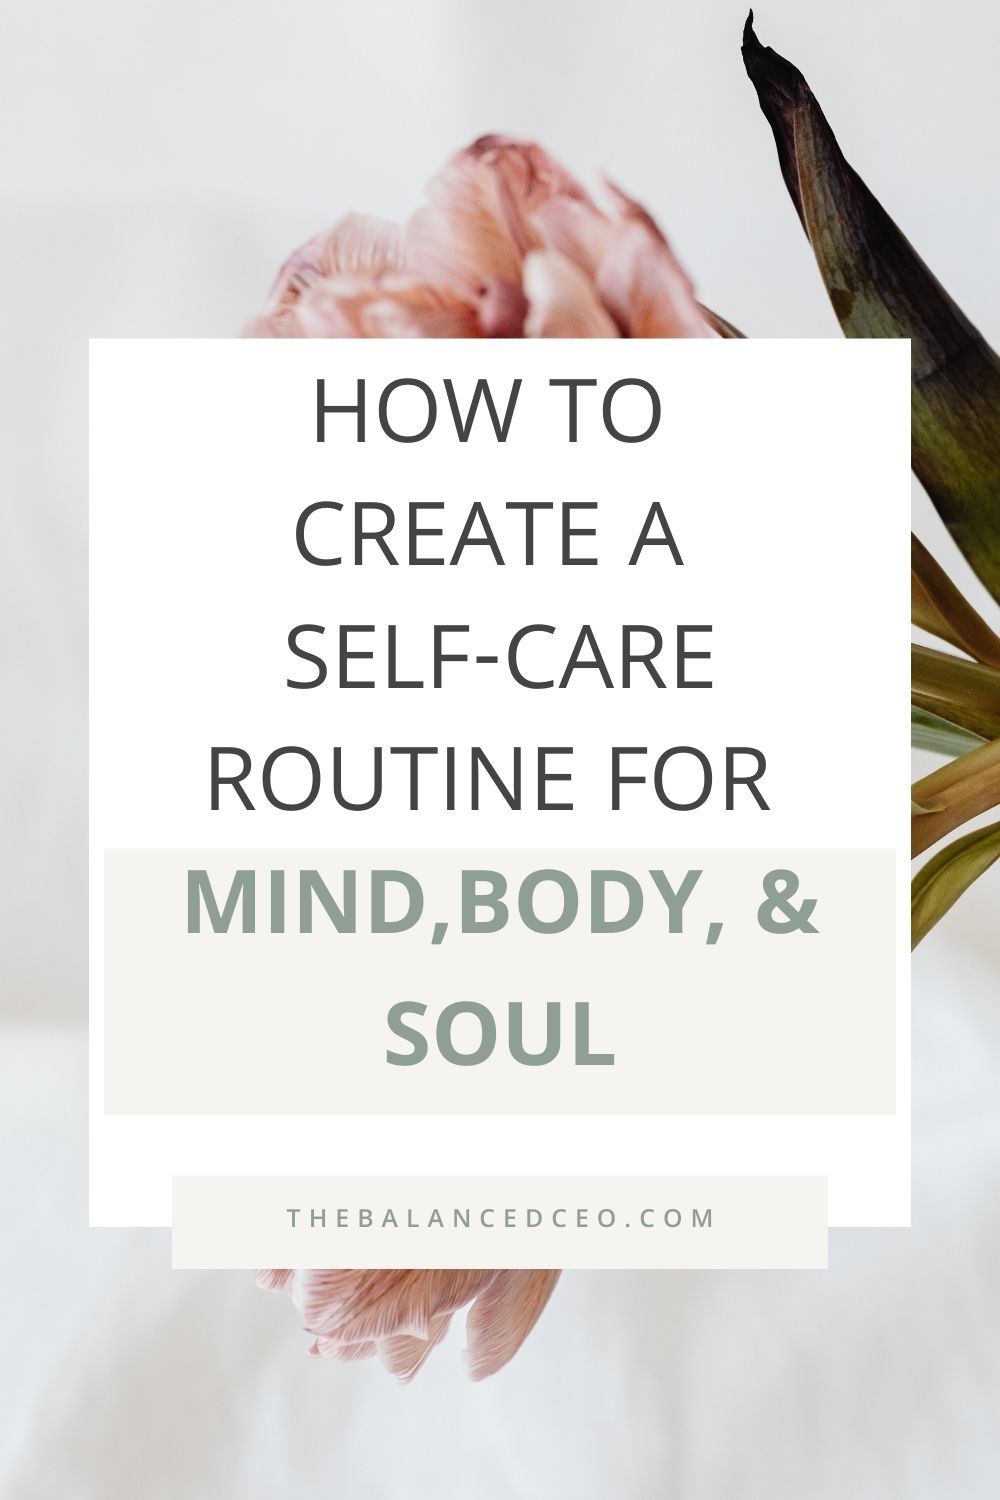 How to Create a Self-Care Routine for Mind, Body, and Soul